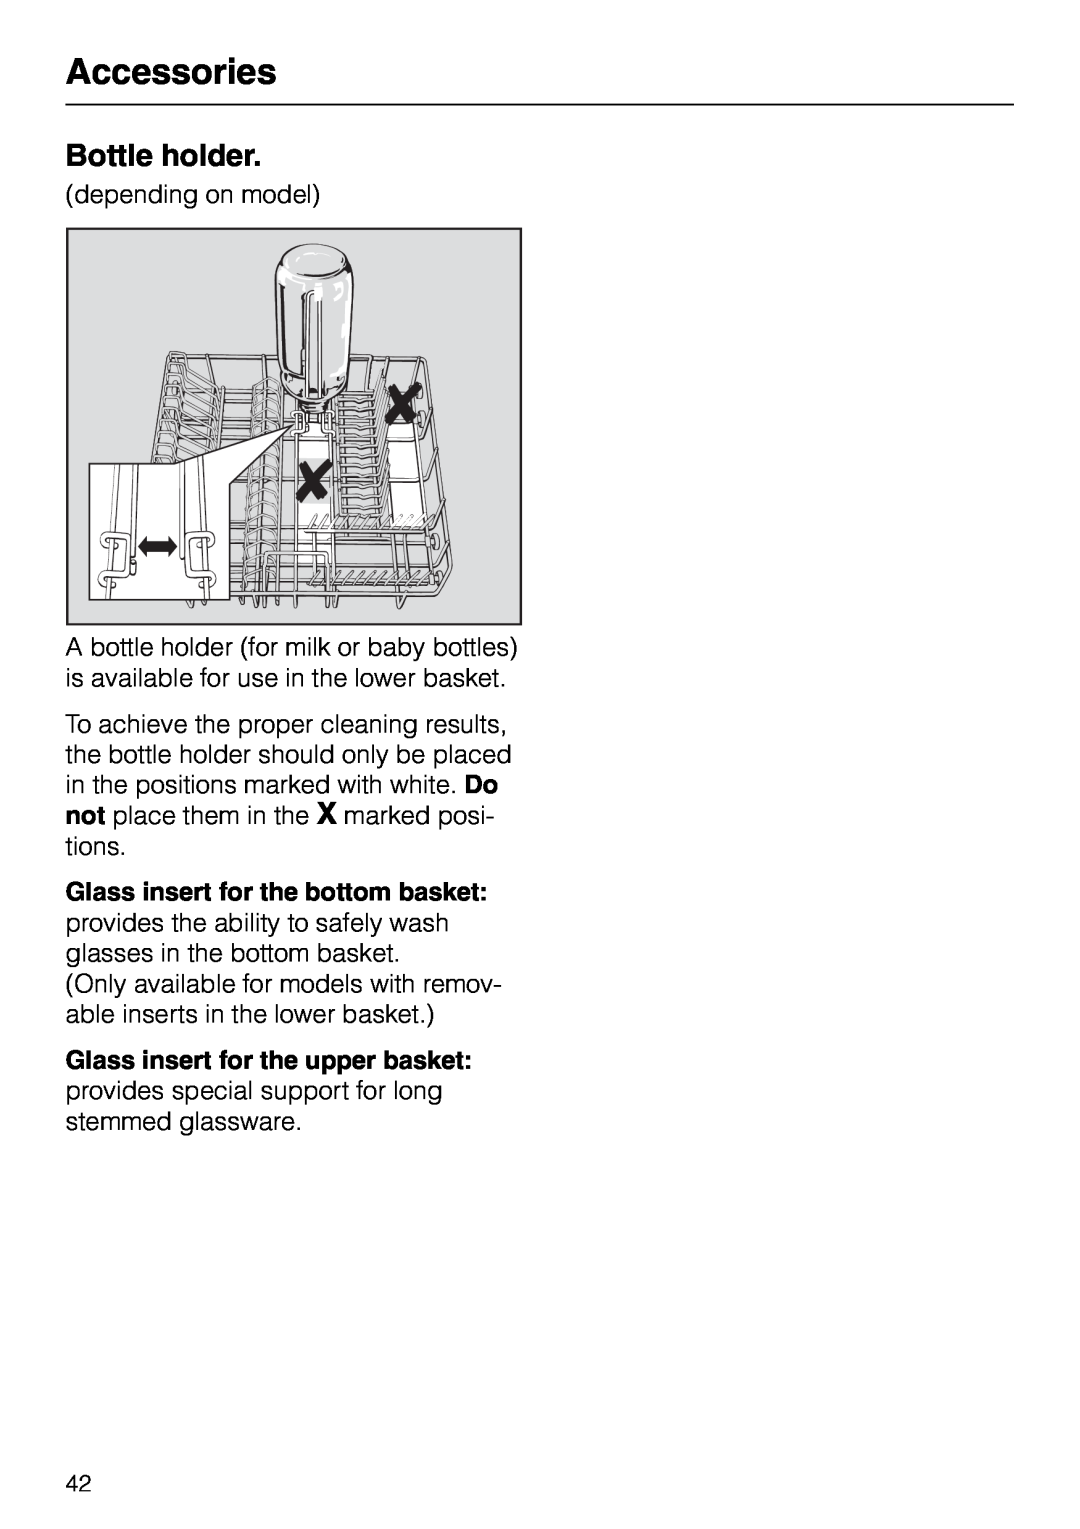 Miele M.-NR. 04 390 922 operating instructions Accessories, Bottle holder 